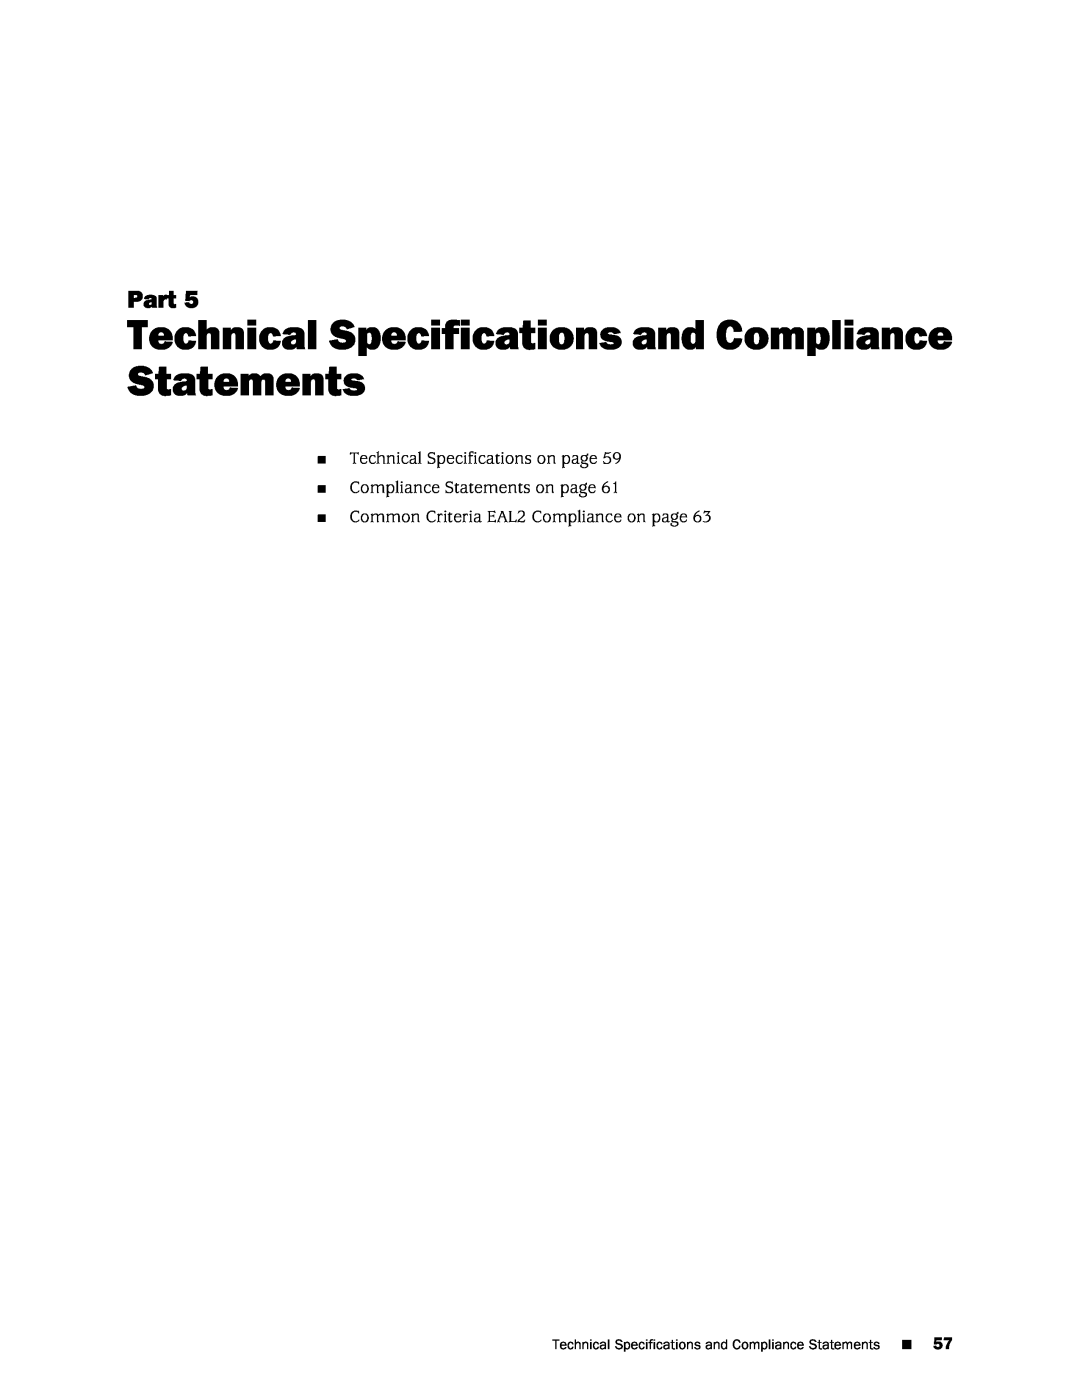 Juniper Networks IDP250 manual Part, Technical Specifications on page, Compliance Statements on page 